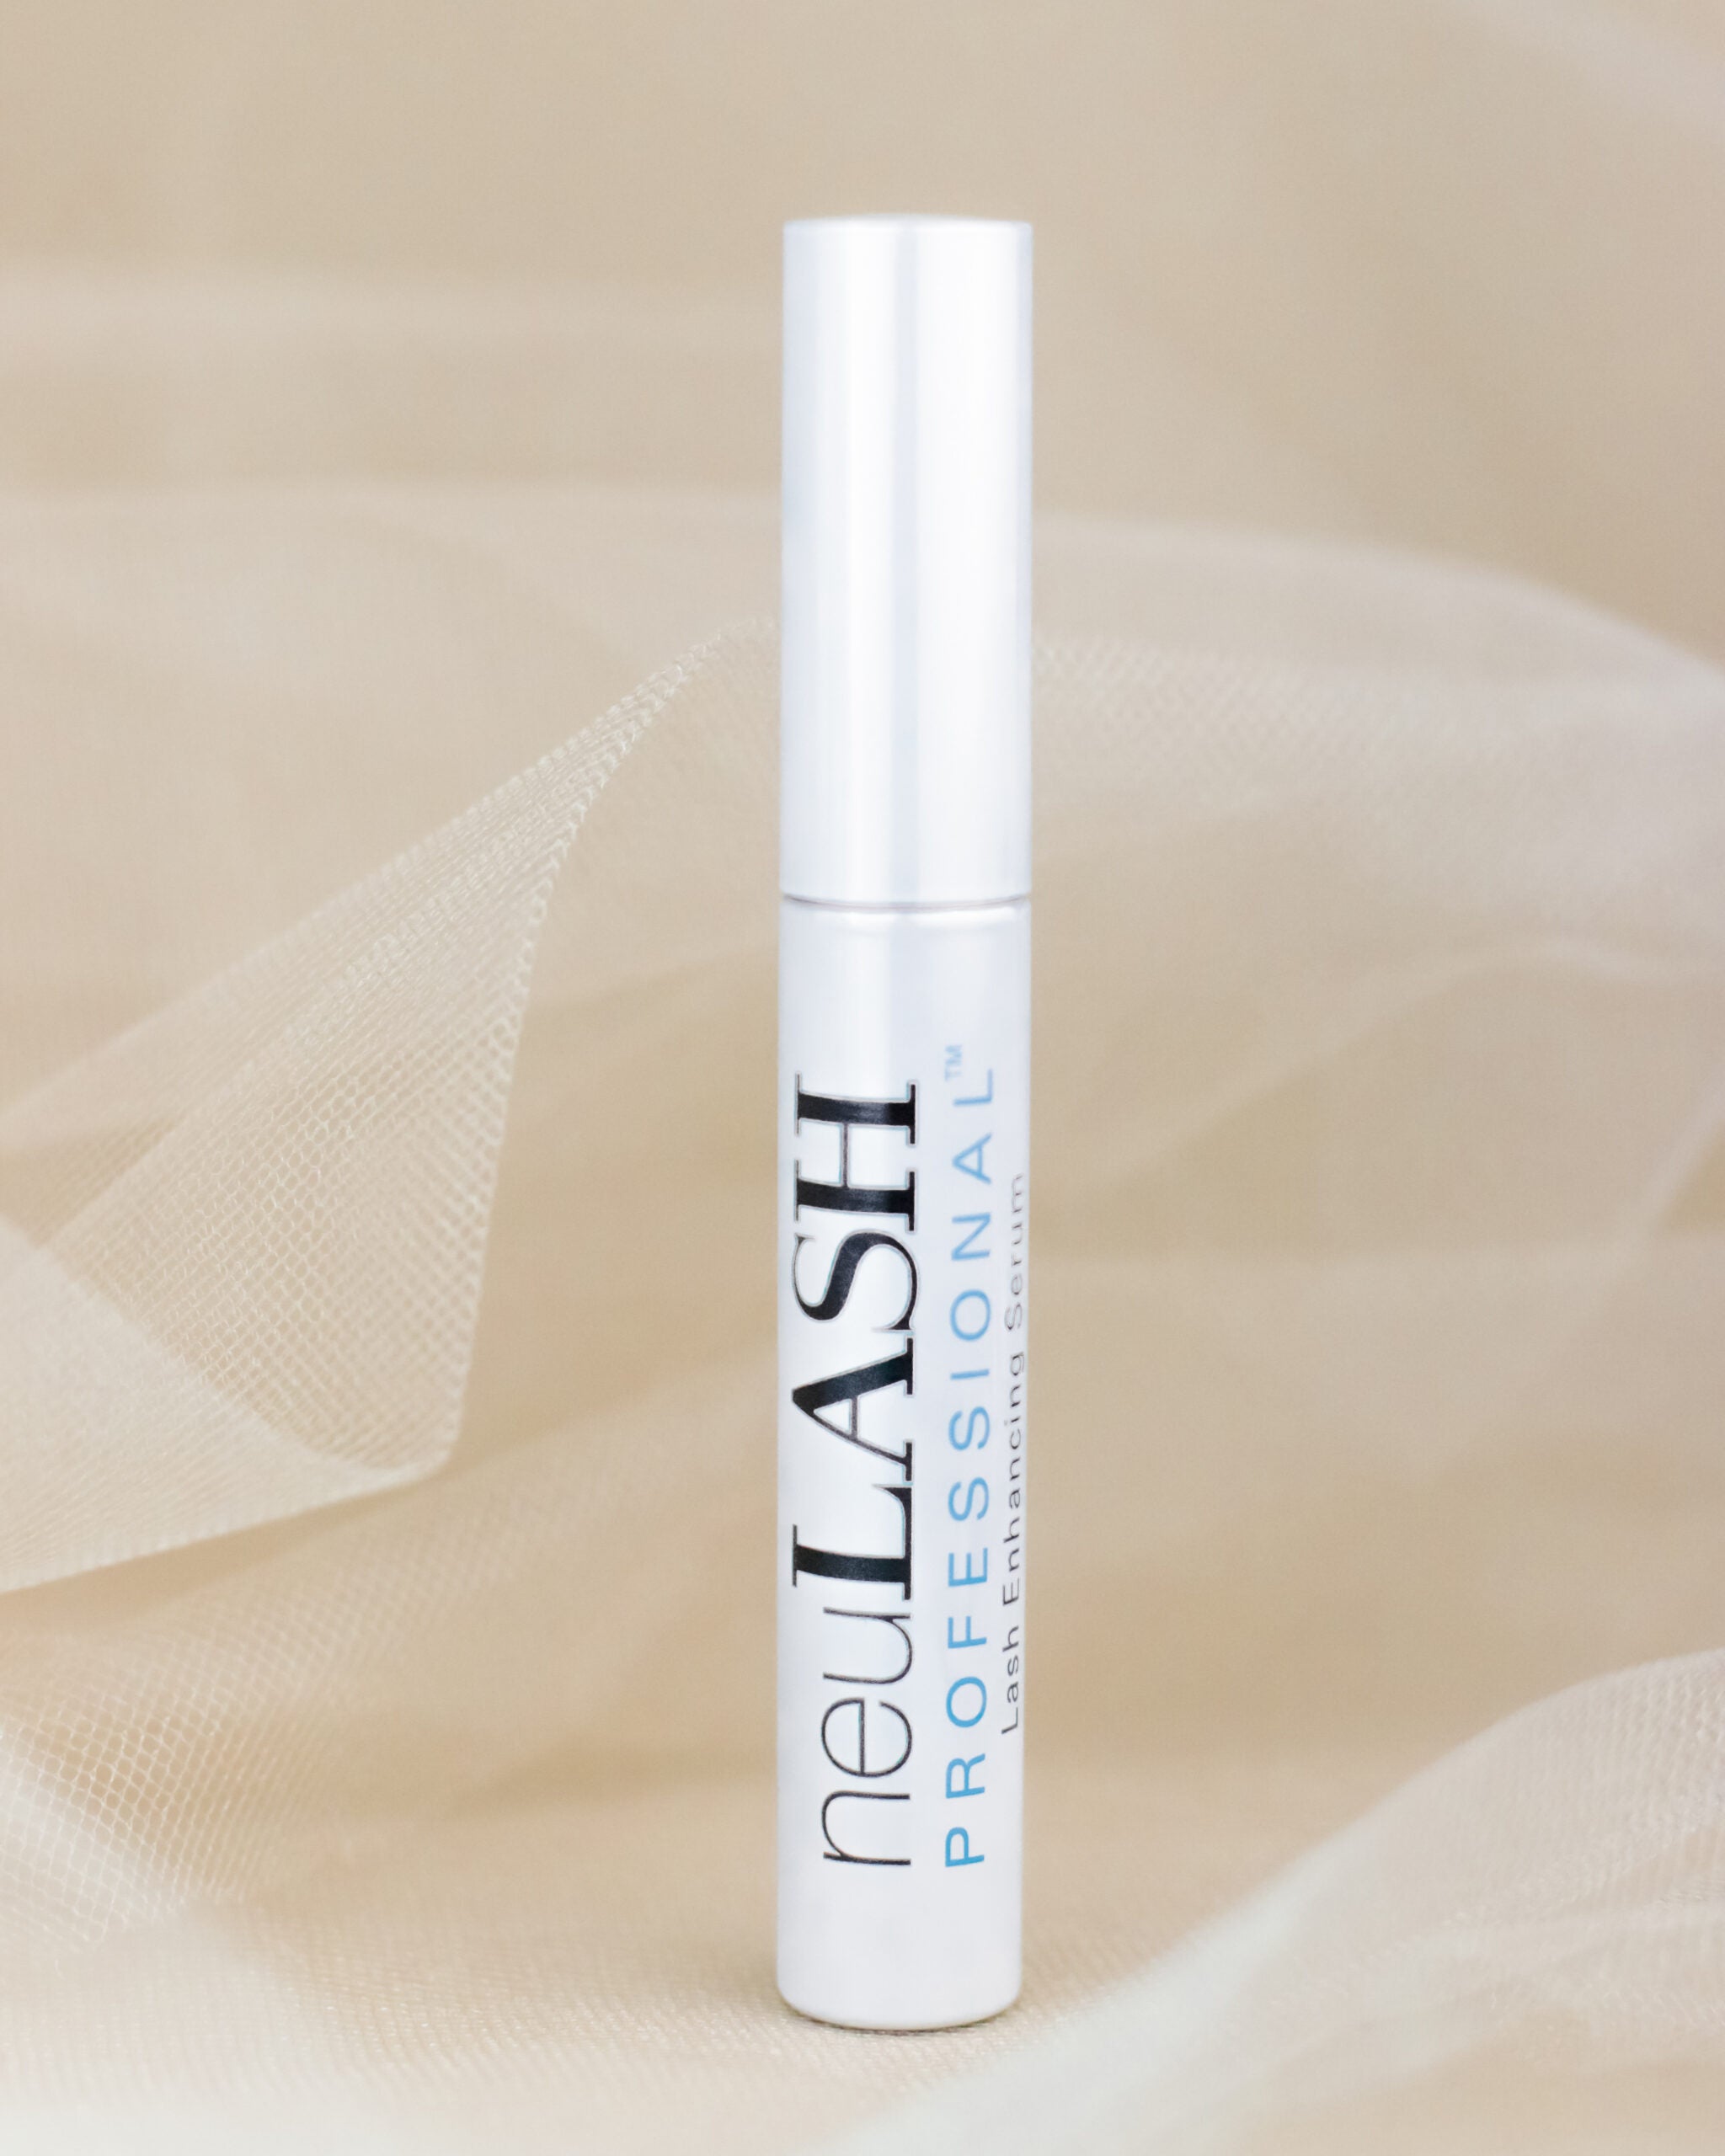 Lash serum for lash growth in front front of neutral background